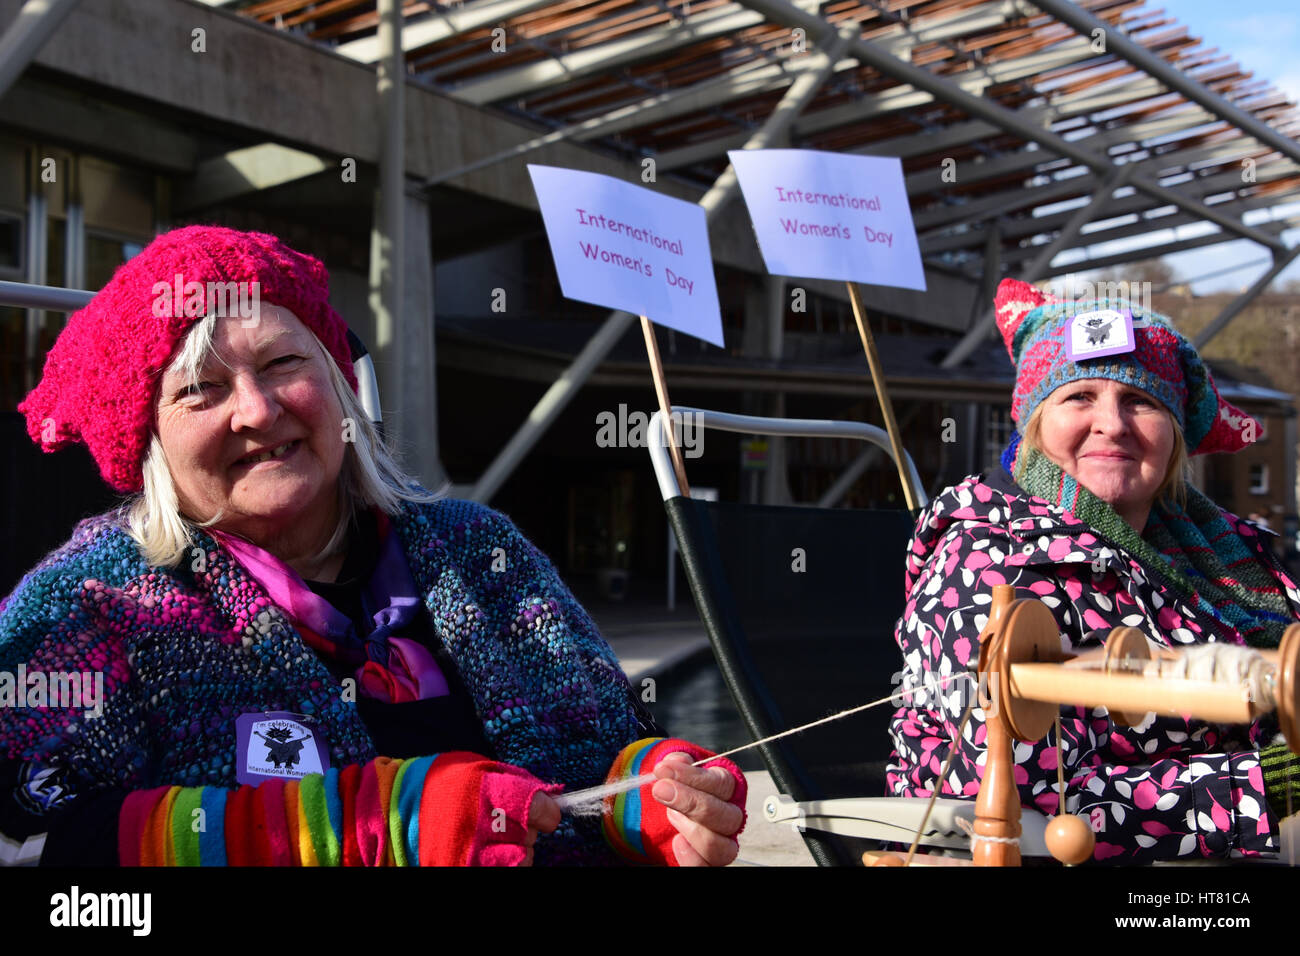 Edinburgh, Scotland, UK. 8th March 2017. Members of Haddington spinners and weavers group celebrate International Women's Day outside the Scottish Parliament with a demonstration of traditional women's crafts, Credit: Ken Jack/Alamy Live News Stock Photo